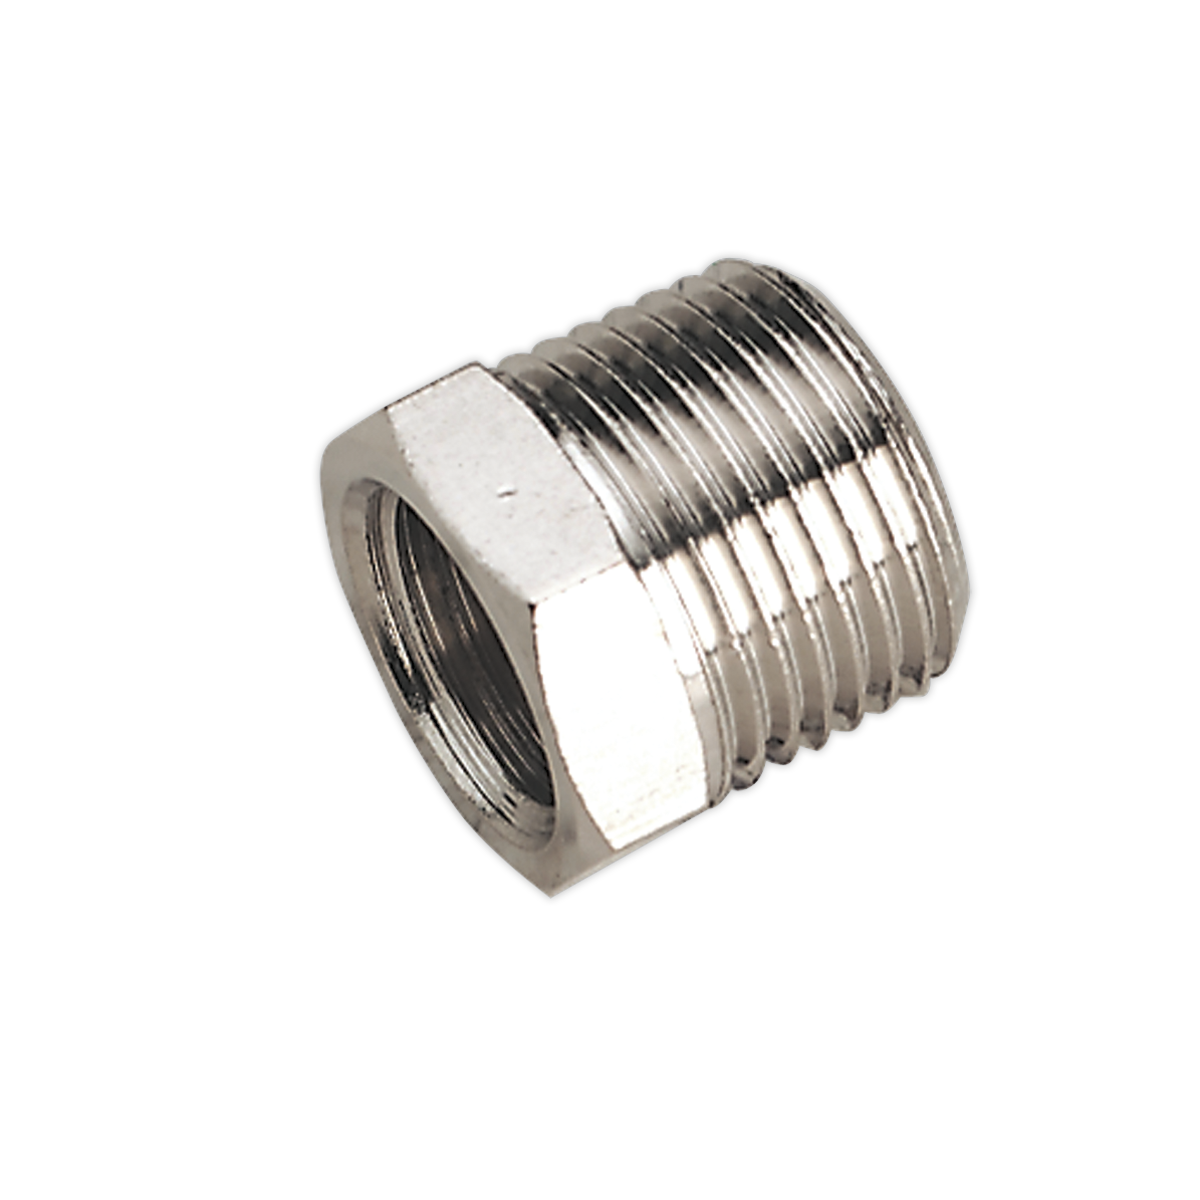 Sealey Adaptor 3/8"BSPT Male to 1/4"BSP Female SA1/3814F | One of a range of fittings suitable for connecting air tools and components with different thread configurations. | toolforce.ie